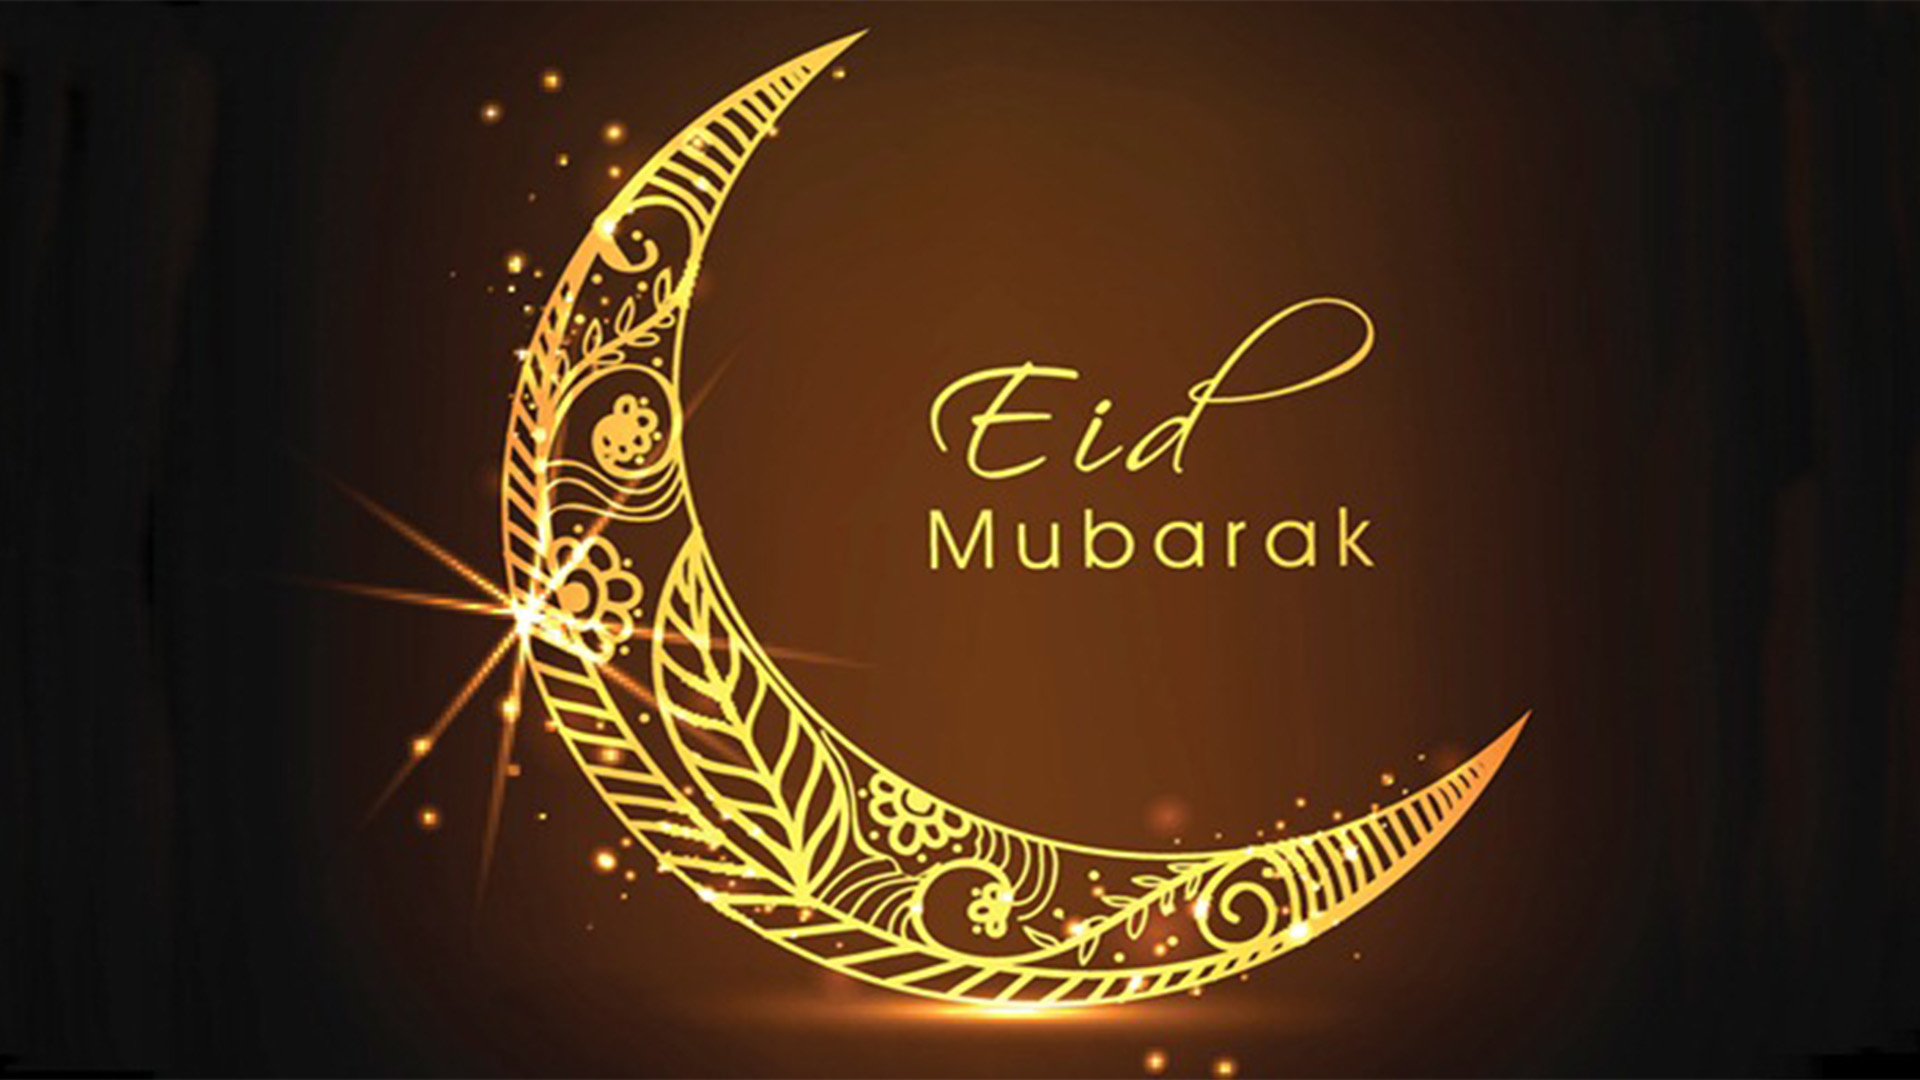 Happy Eid Images & HD Pictures 2018 | Eid Mubarak Wishes